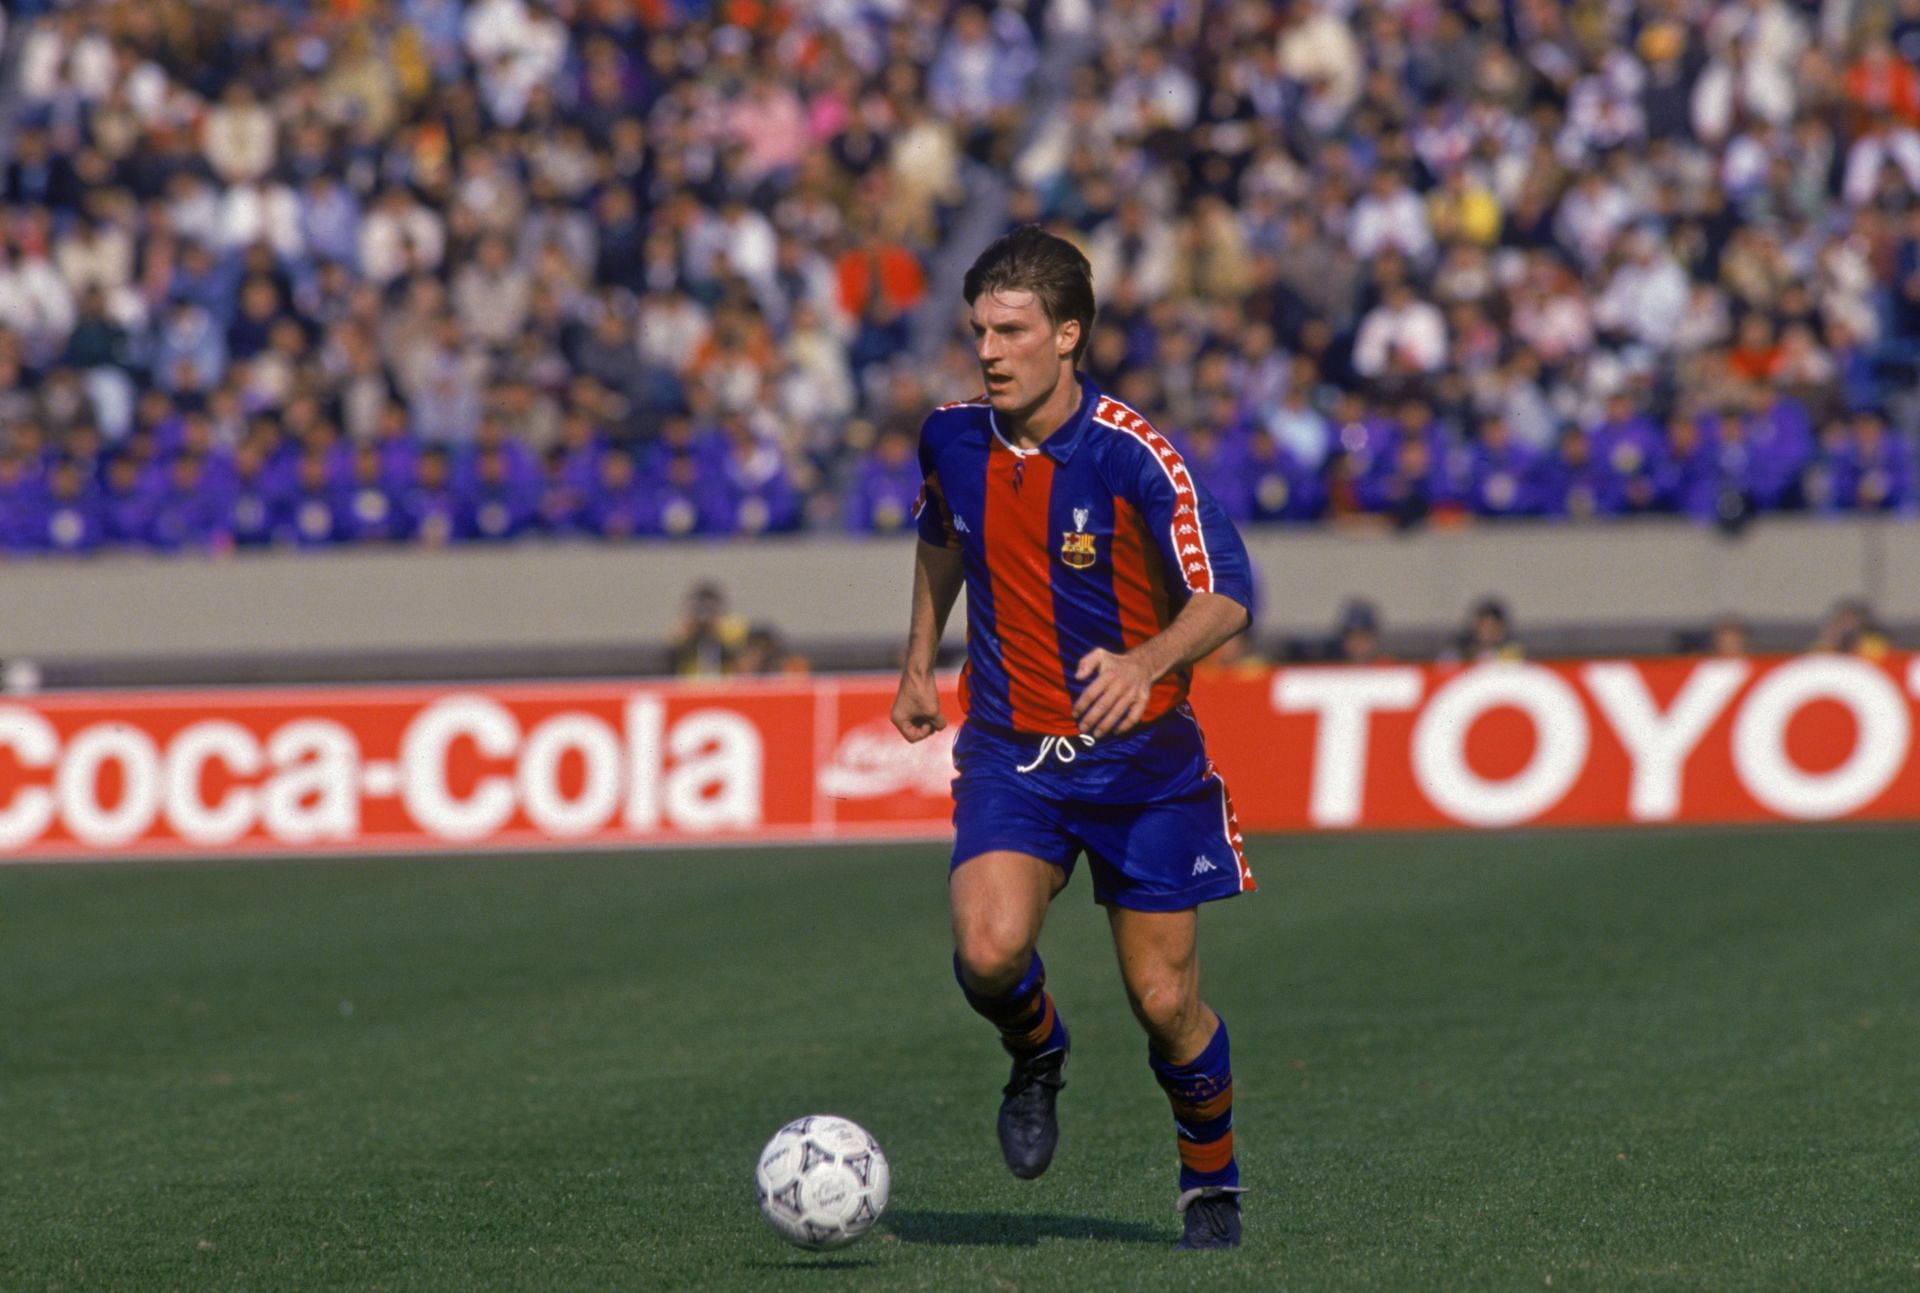 Danish footballer Michael Laudrup playing for the Catalan giants, early 1990s.